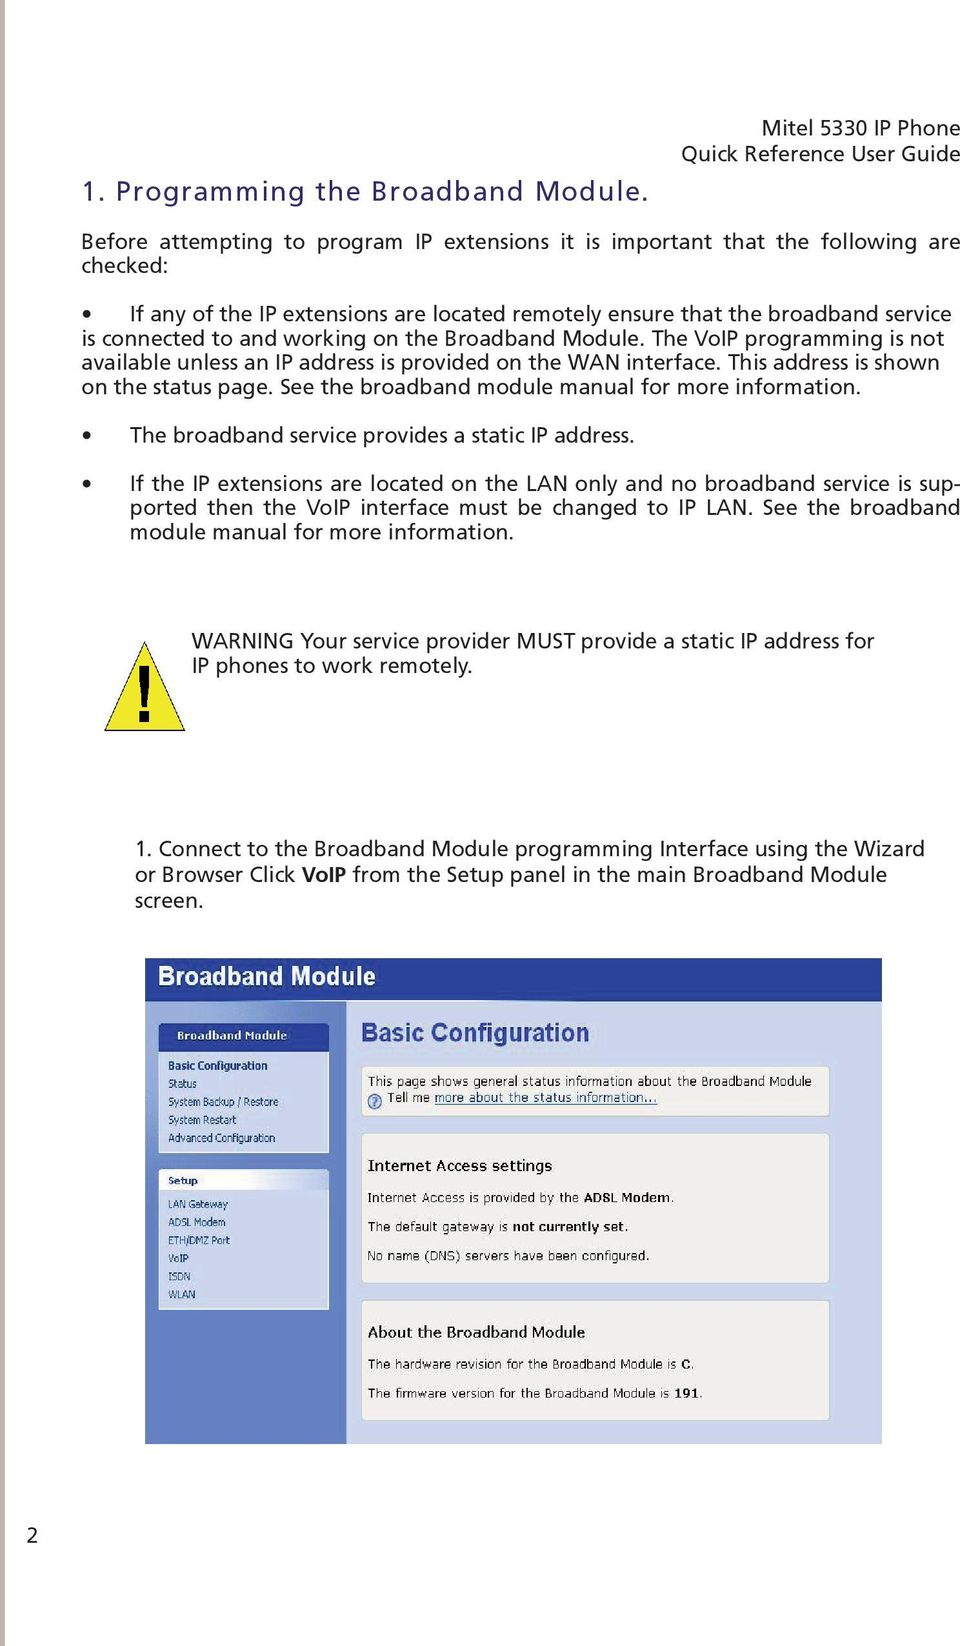 connected to and working on the Broadband Module. The VoIP programming is not available unless an IP address is provided on the WAN interface. This address is shown on the status page.